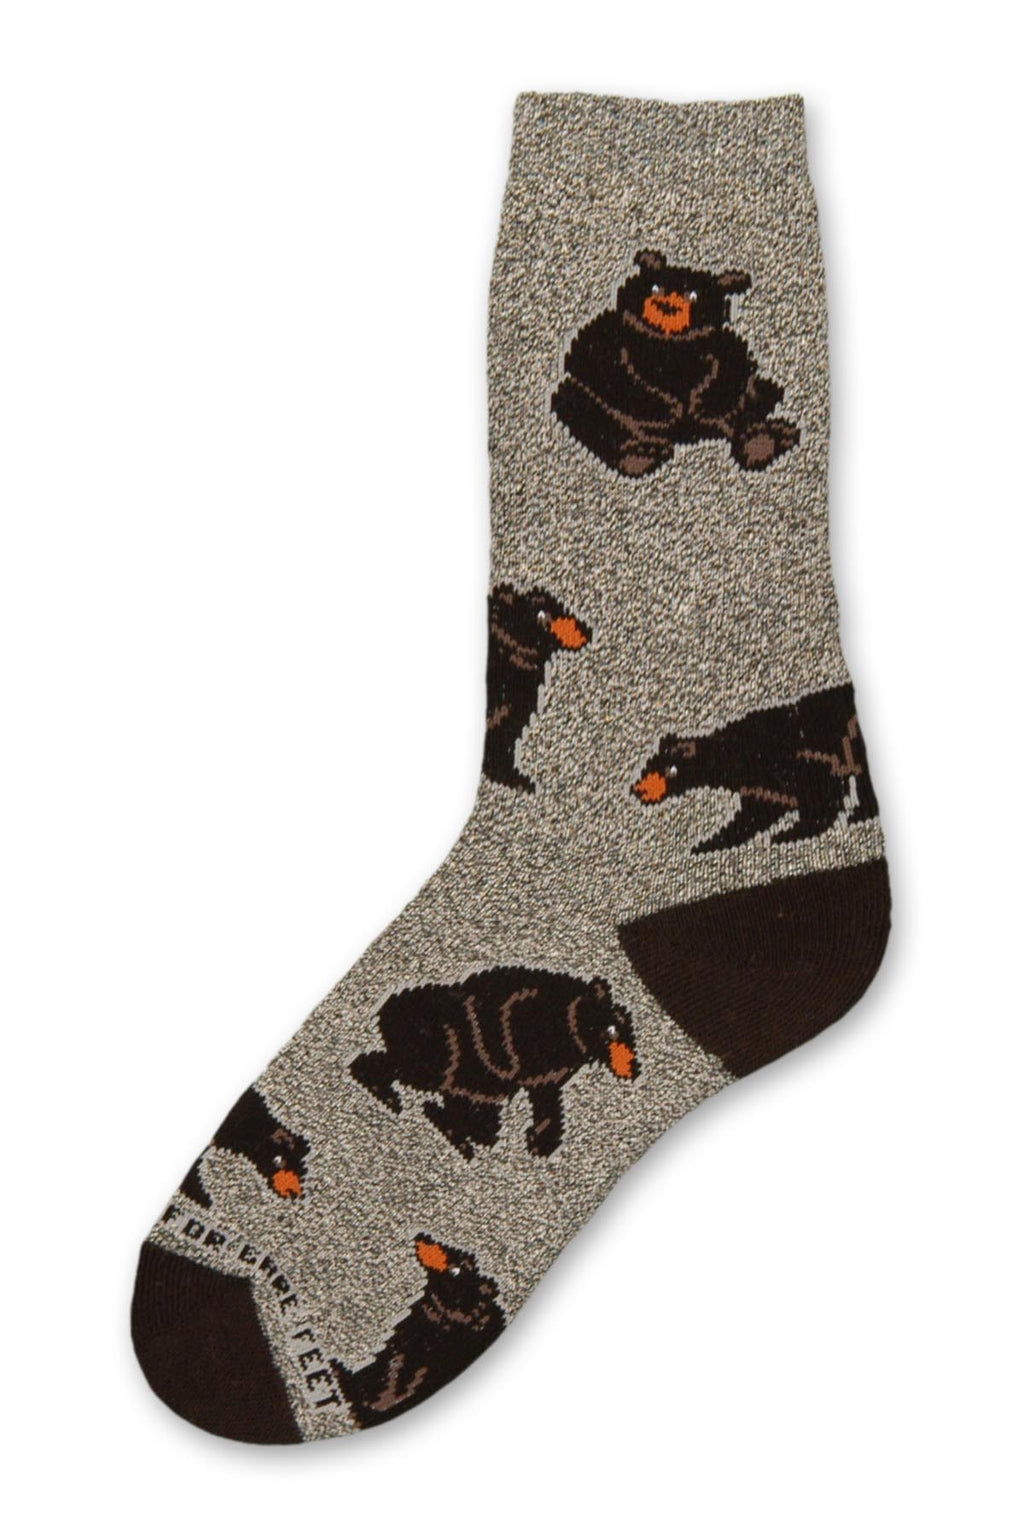 On a Marbled Grey background with Black Heels and Toes are Poses of Bears. They are Sitting Standing and Looking at each other.